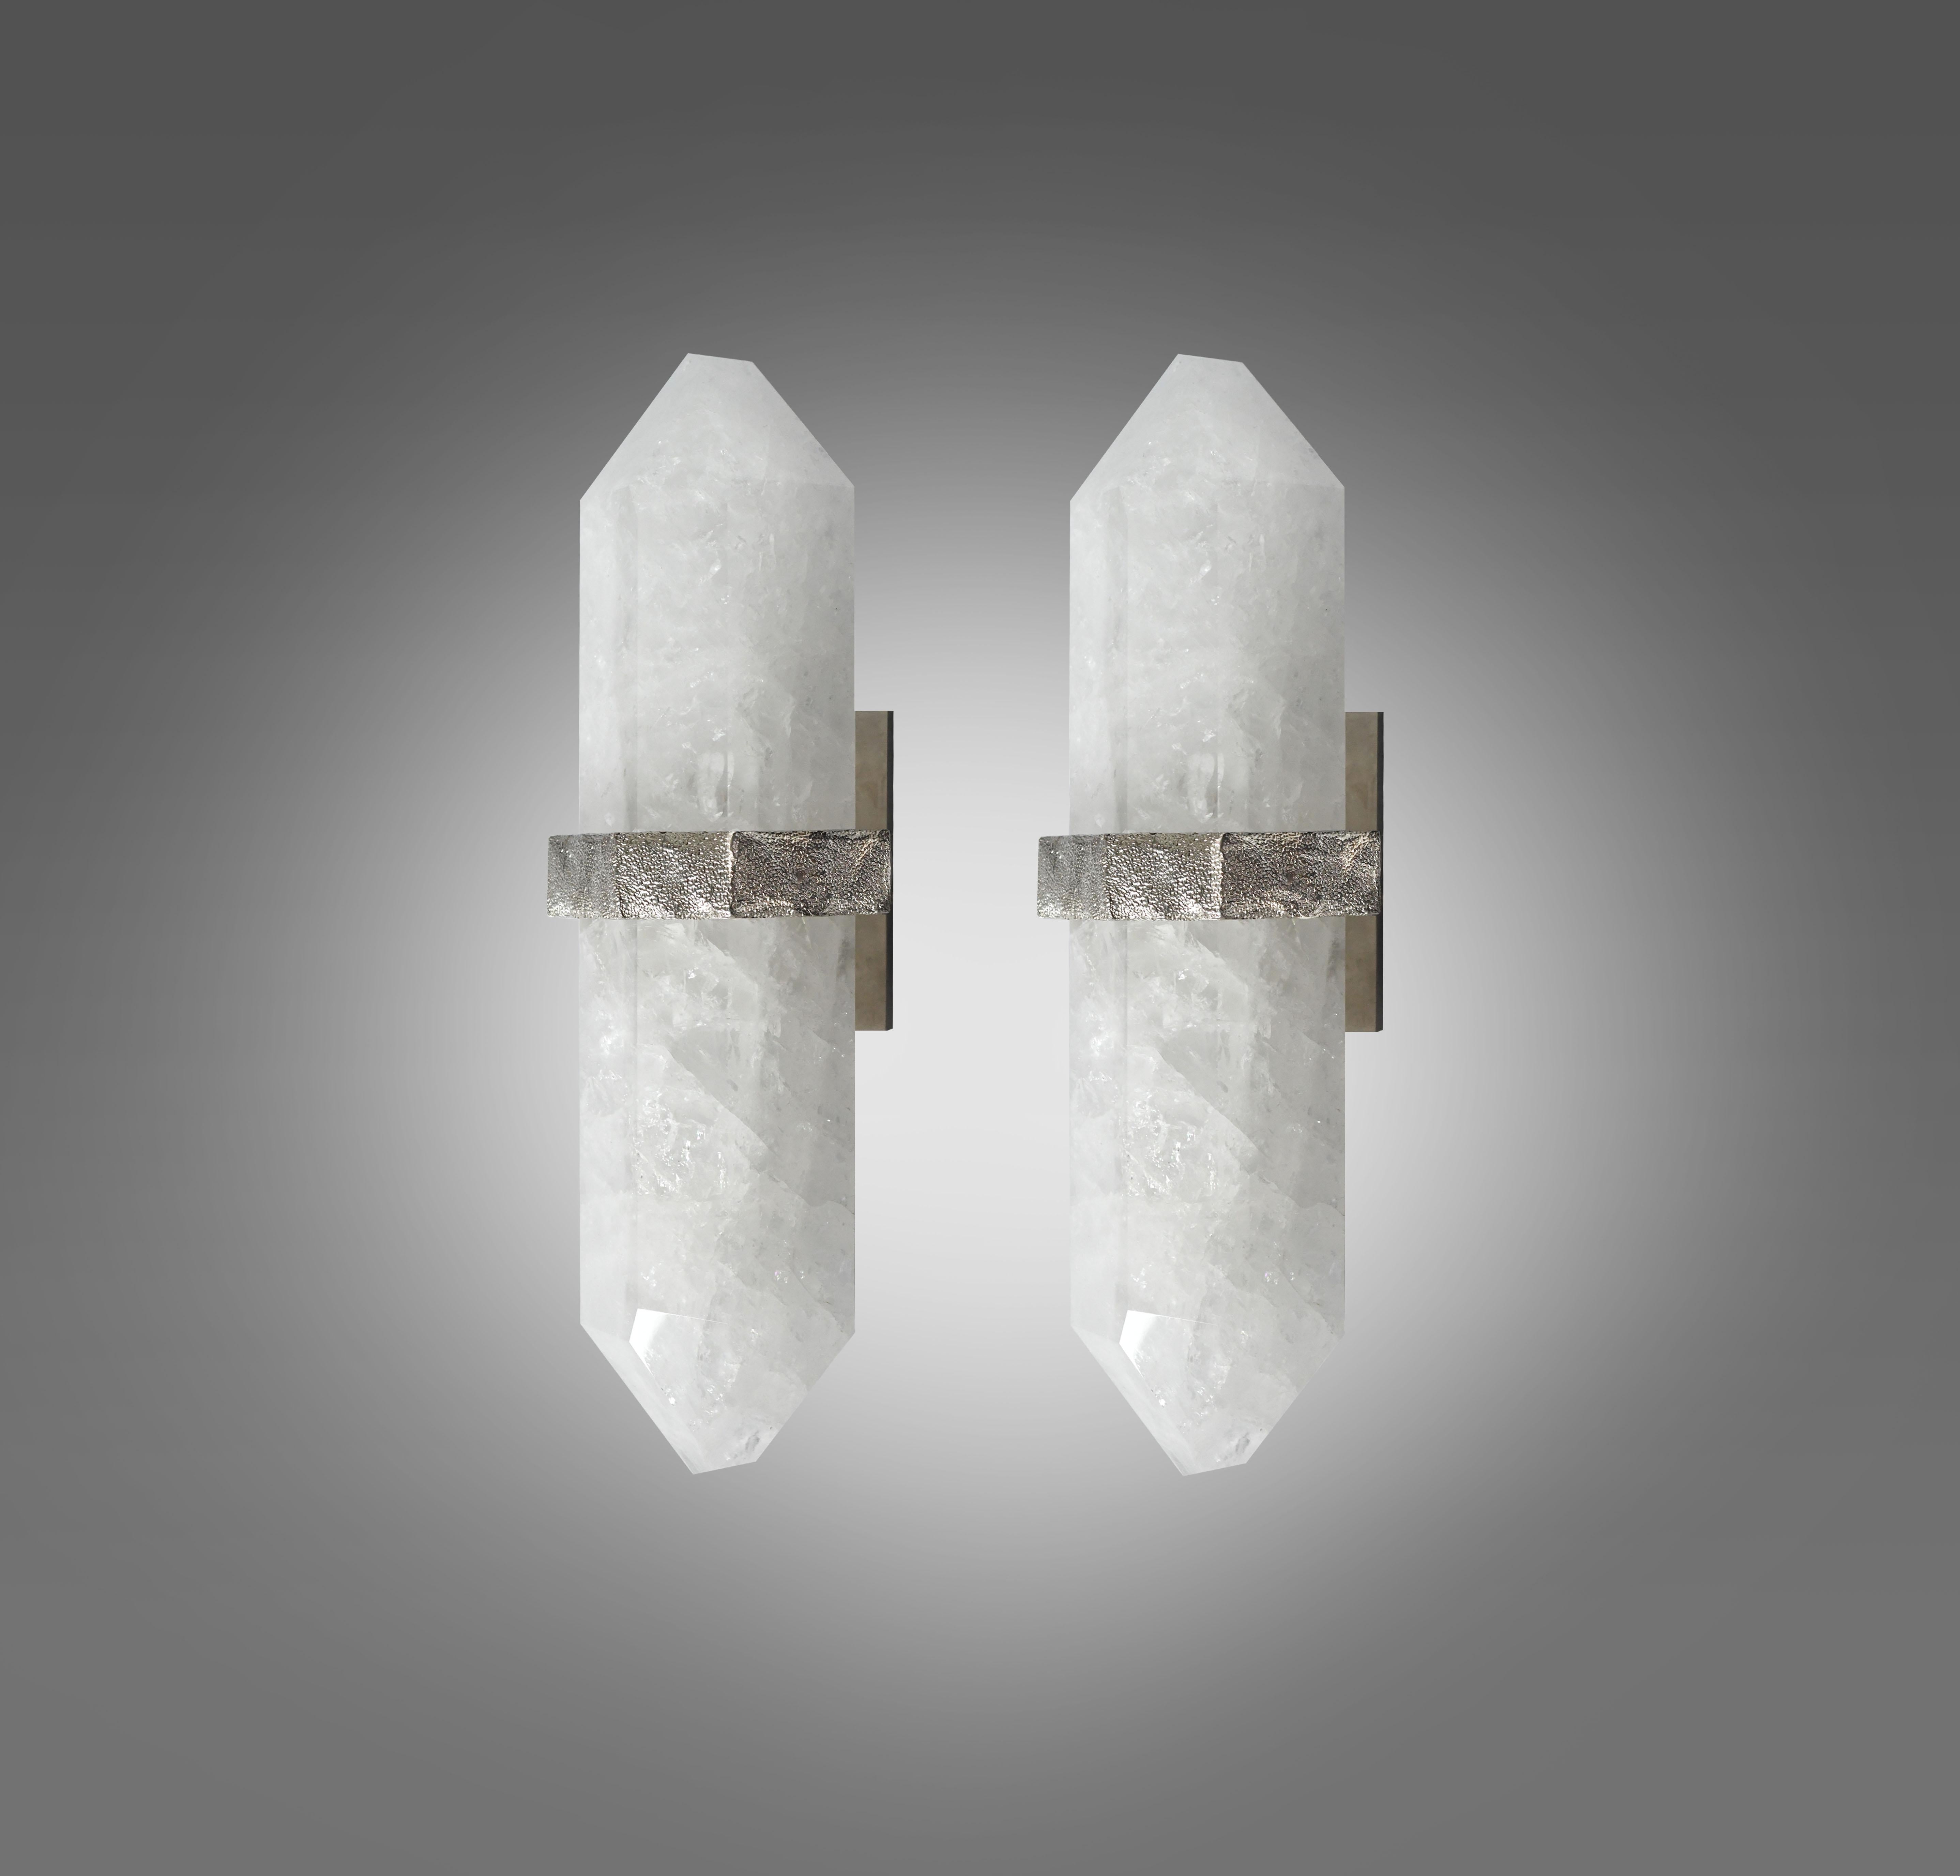 Group of eight fine carved diamond form rock crystal quartz wall sconces, mount with rich texture of cast nickel plating decoration, created by Phoenix Gallery NYC. 
Custom size, finish, and quantity upon request. 
Each sconce installed two